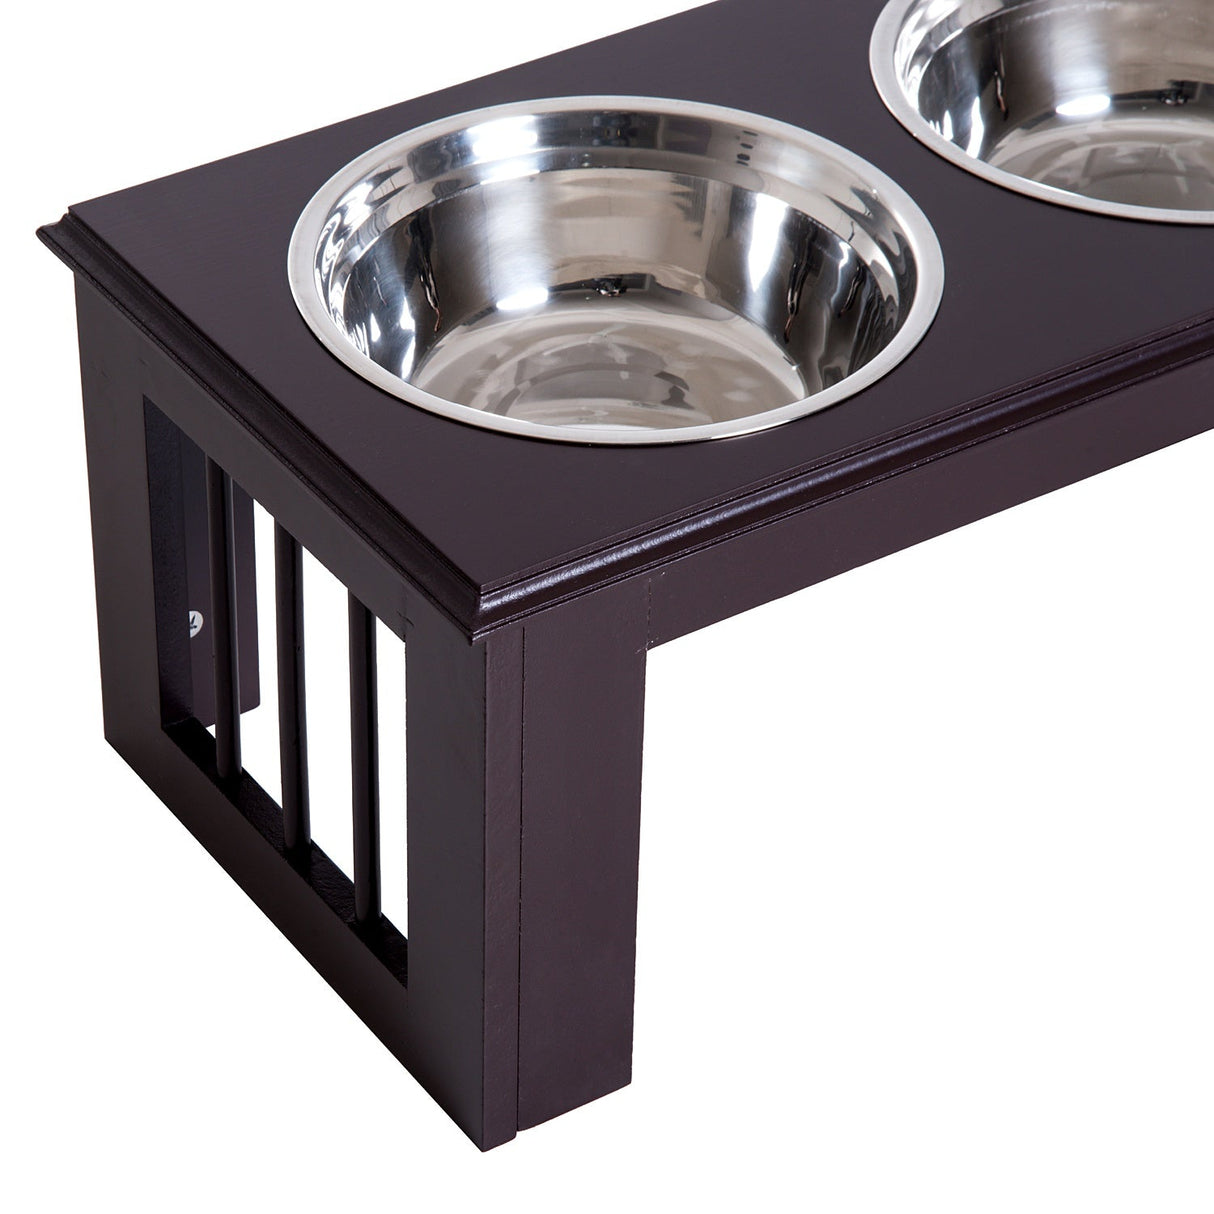 Elevated Stainless Steel Pet Feeder 25H cm, PawHut, Brown